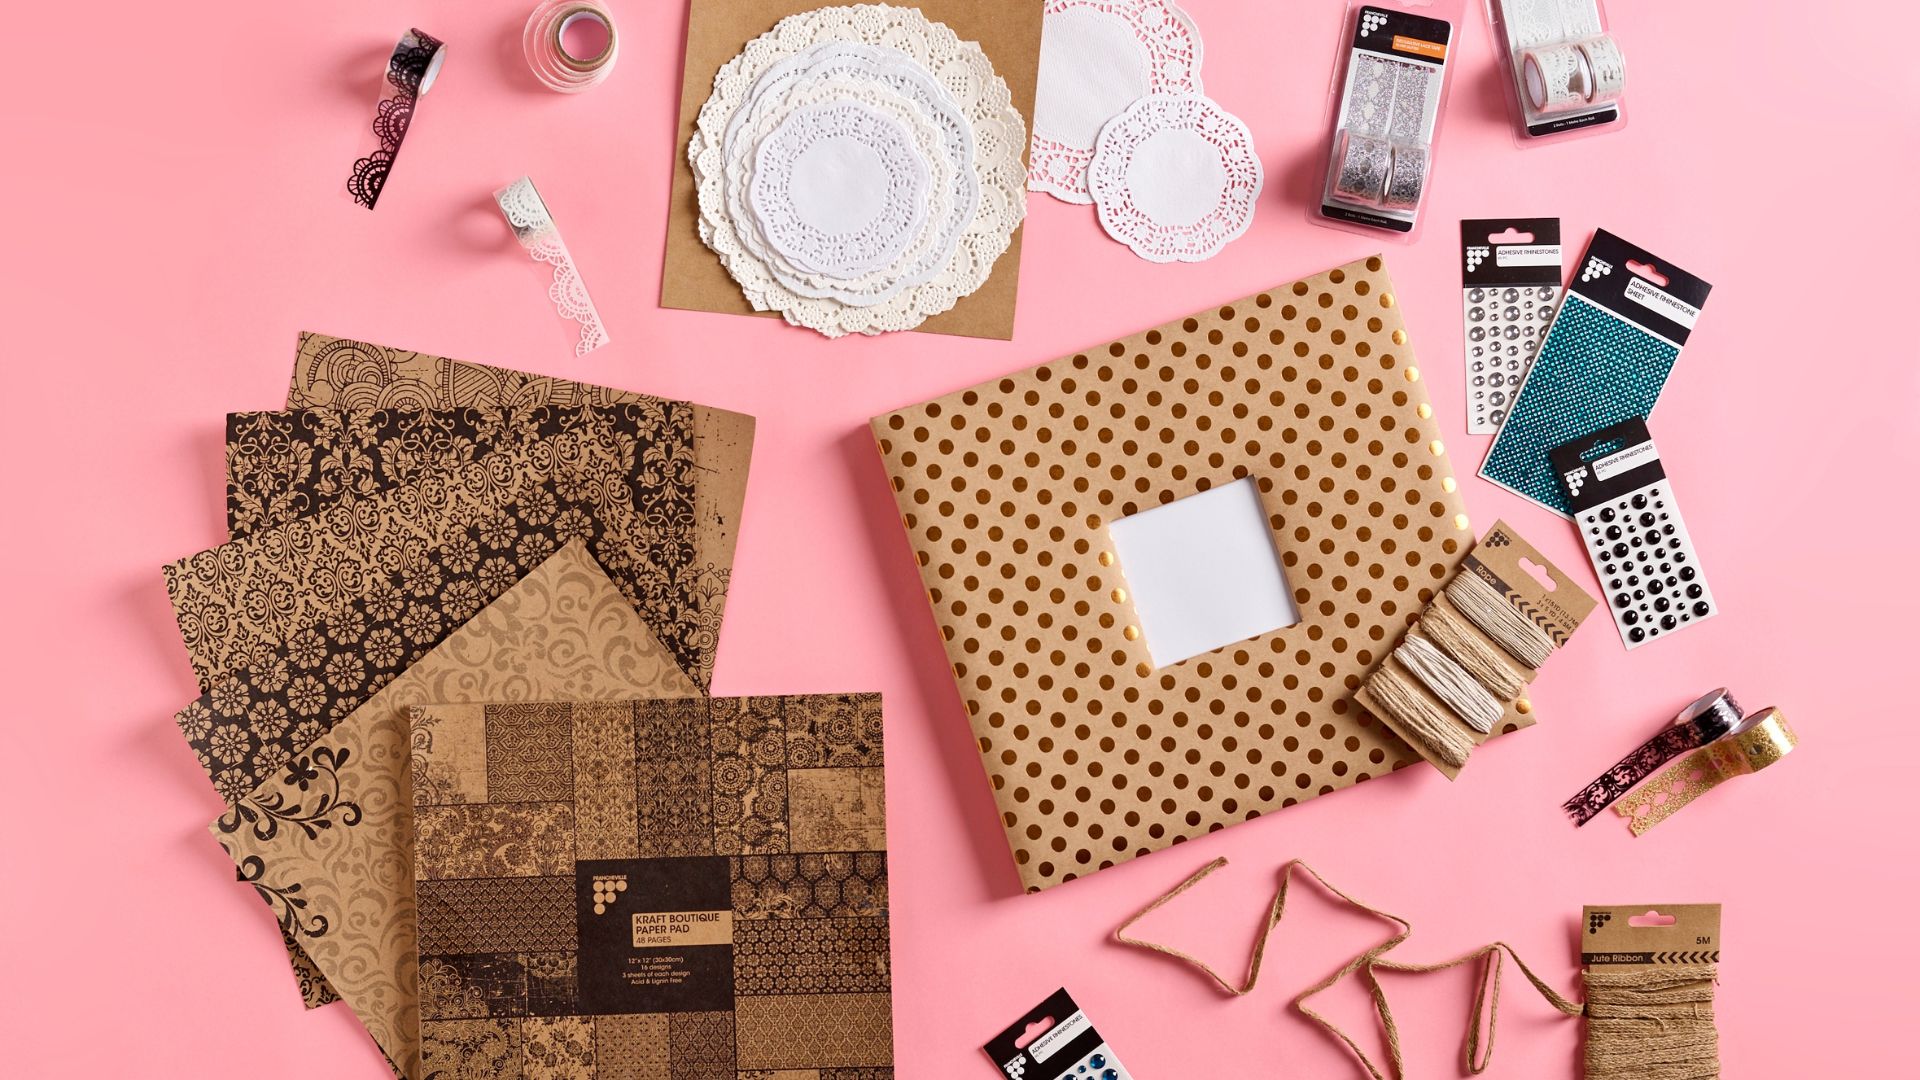 How to create a holiday scrapbook